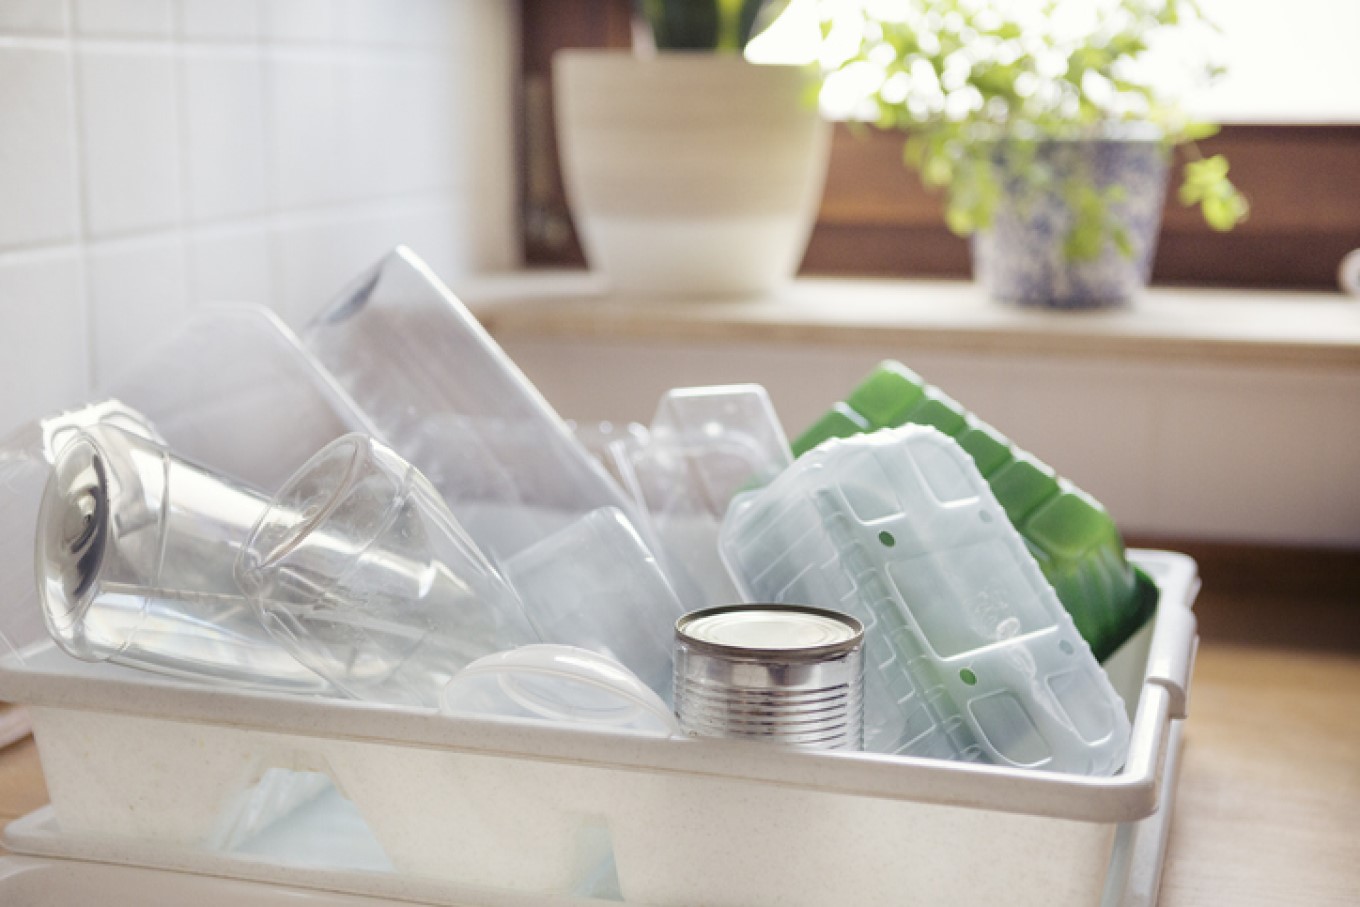 Encourage your household to rinse their recyclables.